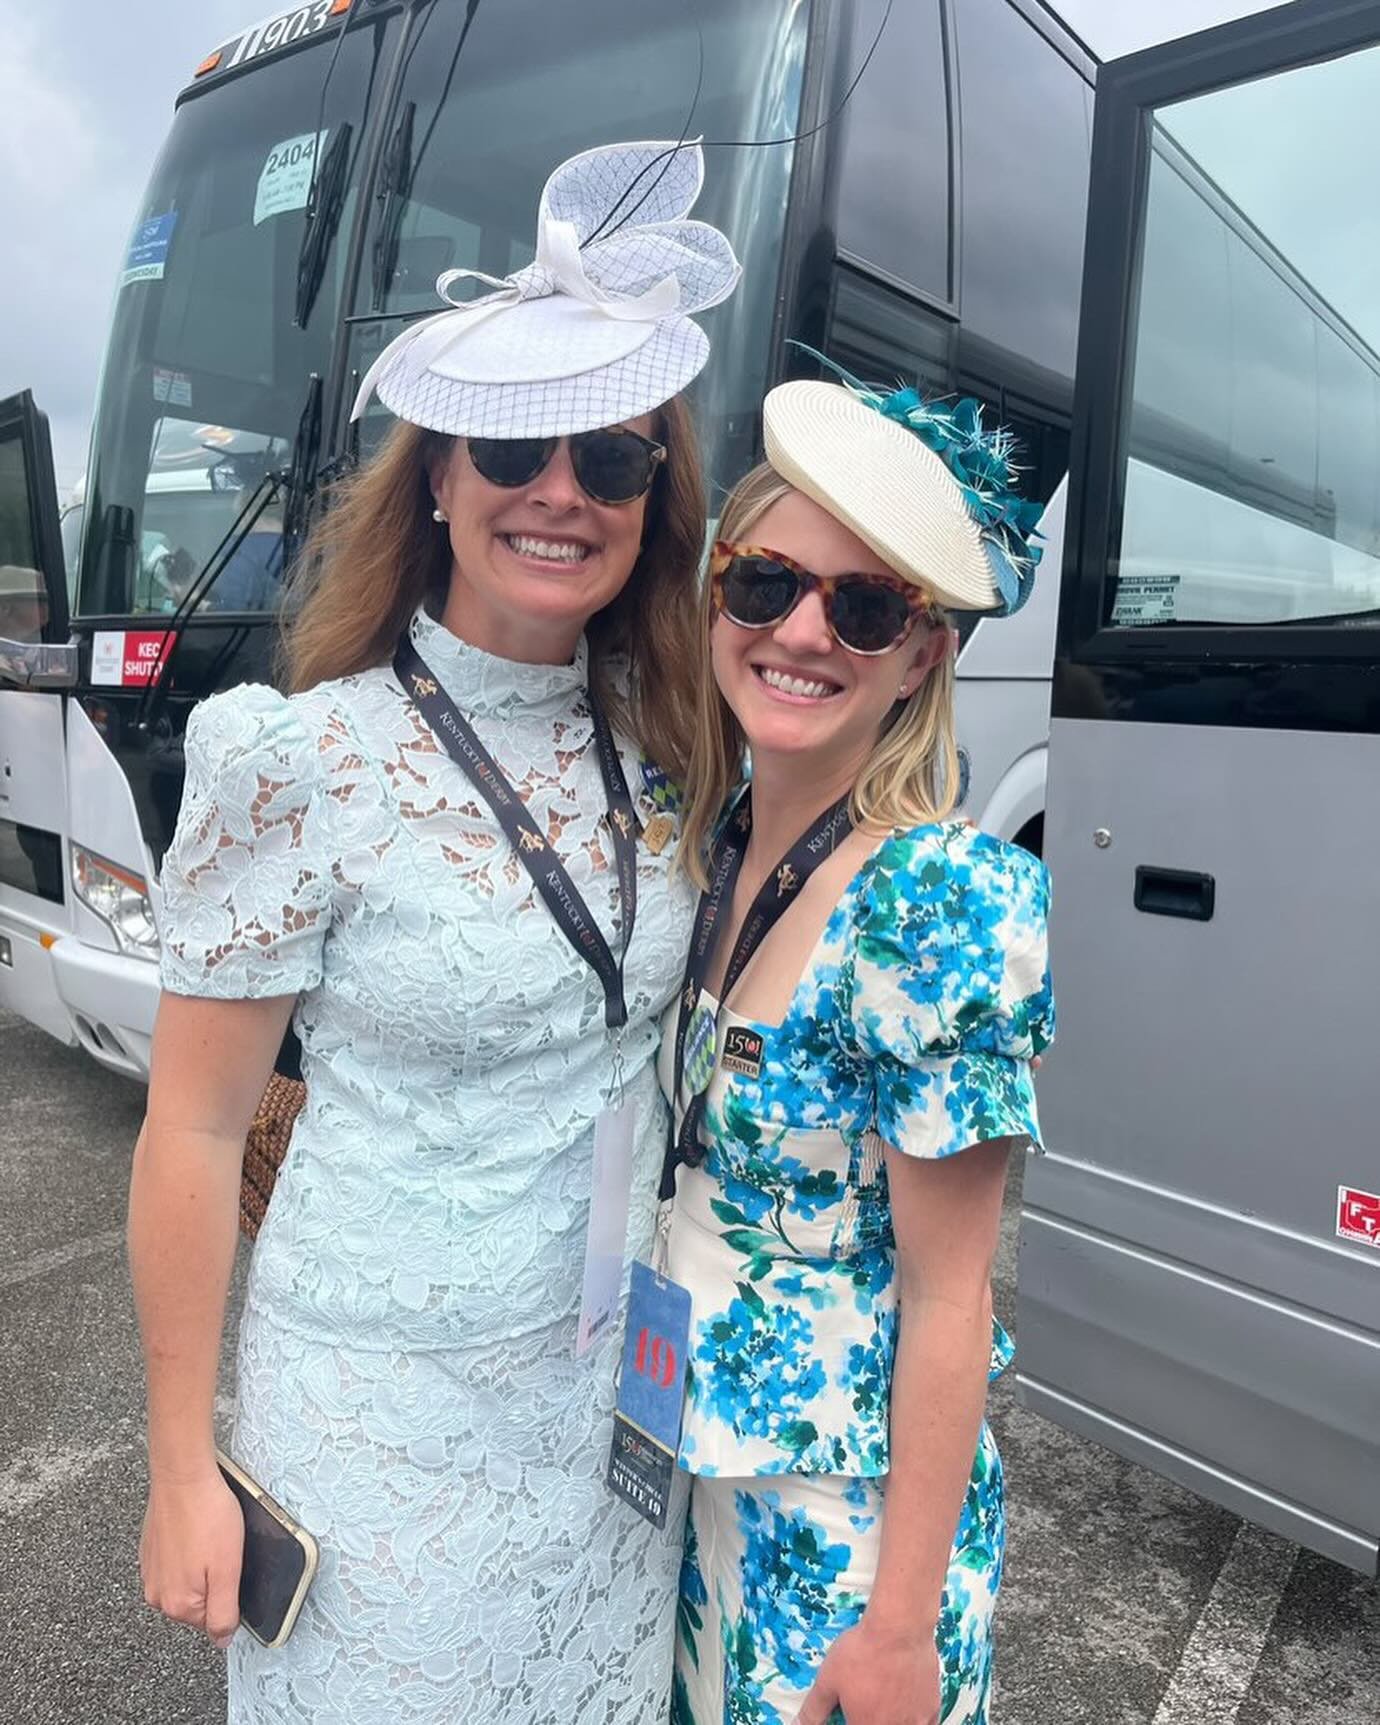 Check out these Derby Headpieces from our member @jenniferhoertz 

#derbyhat #kyderby #derby150 #hatstyle #bestsressedlady #custommillinery #churchilldowns #runfortheroses #racingfashion @milliners_guild